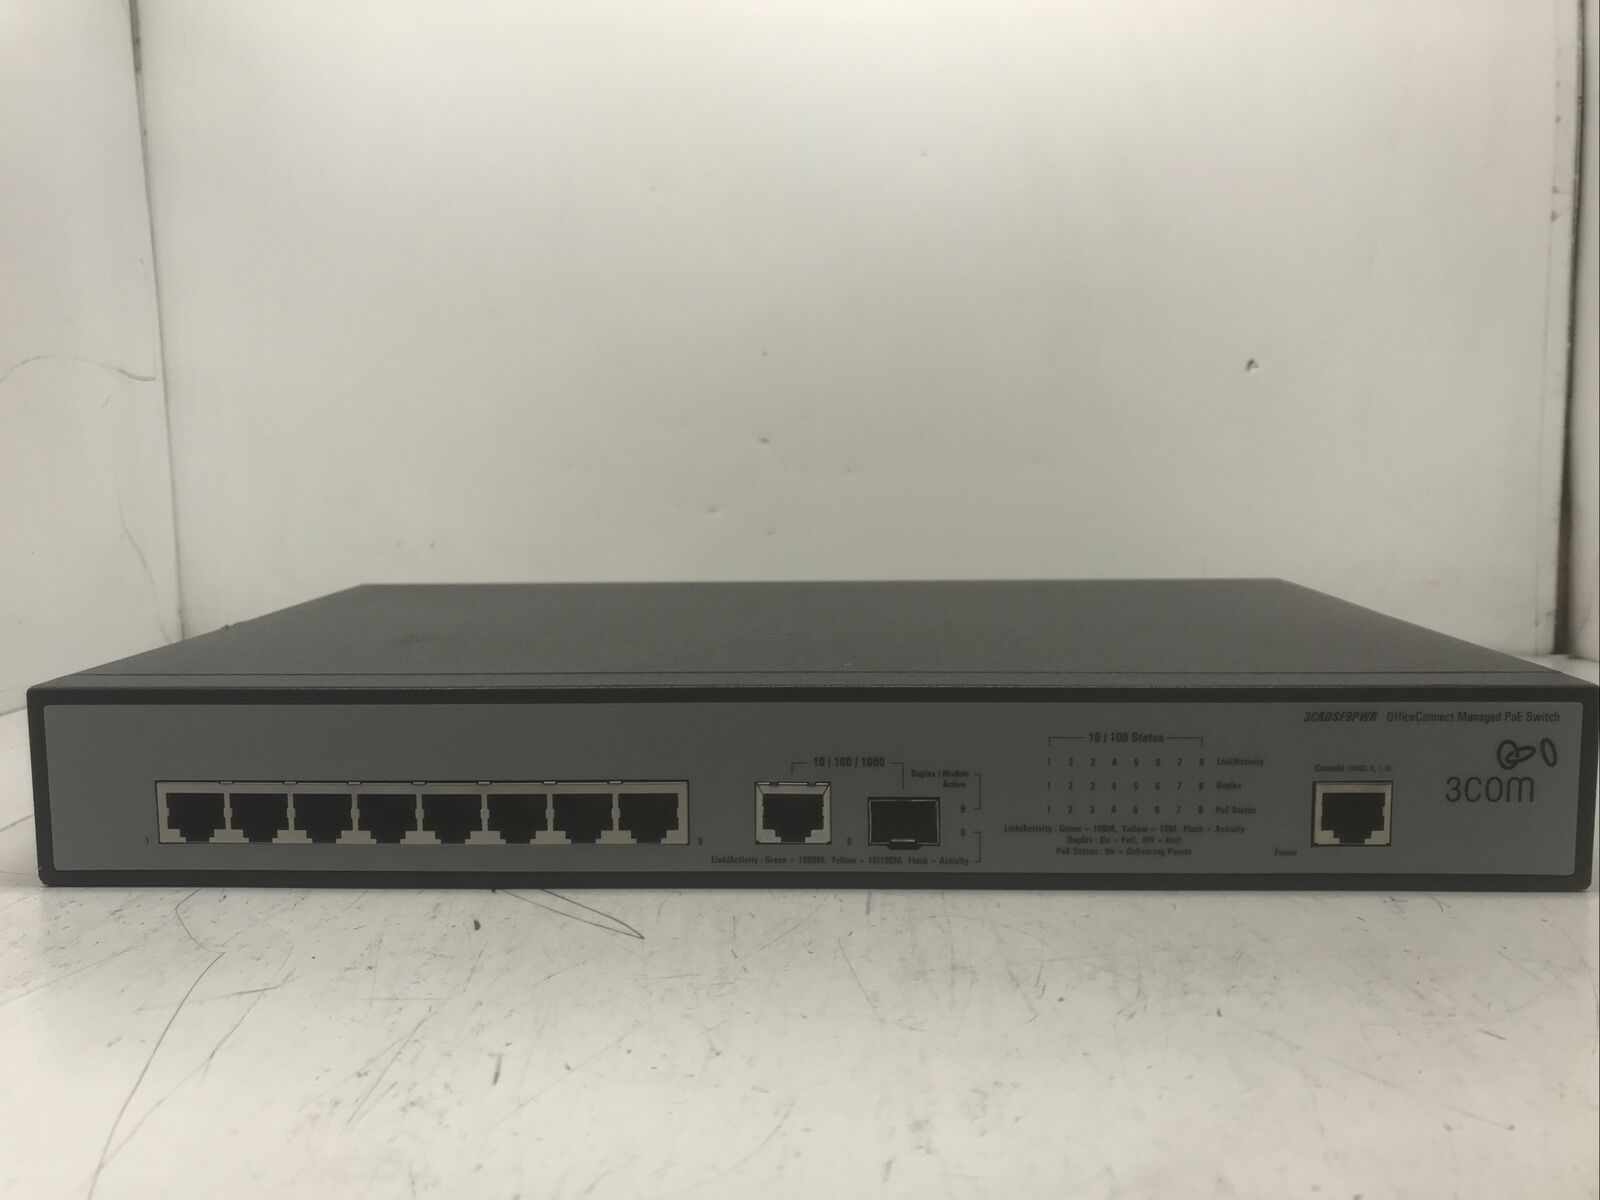 3COM 3CRDSF9PWR Office Connect Managed PoE Switch